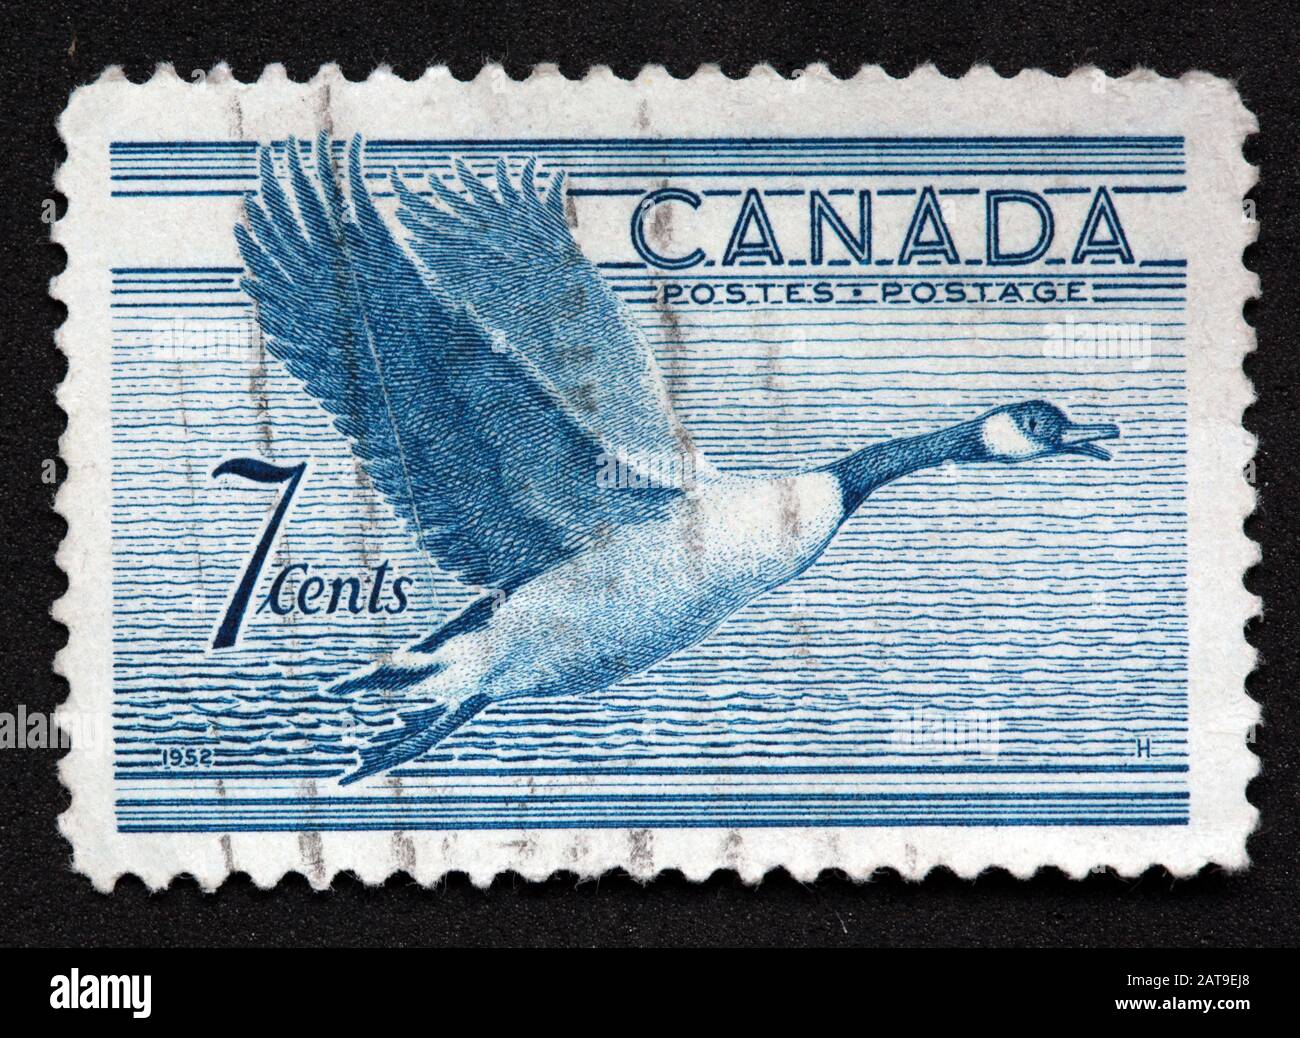 Canadian Stamp, Canada Stamp, Canada Post,used stamp,blue stamp, Canada 7cents , 1952, Canada goose, postes, postage Stock Photo